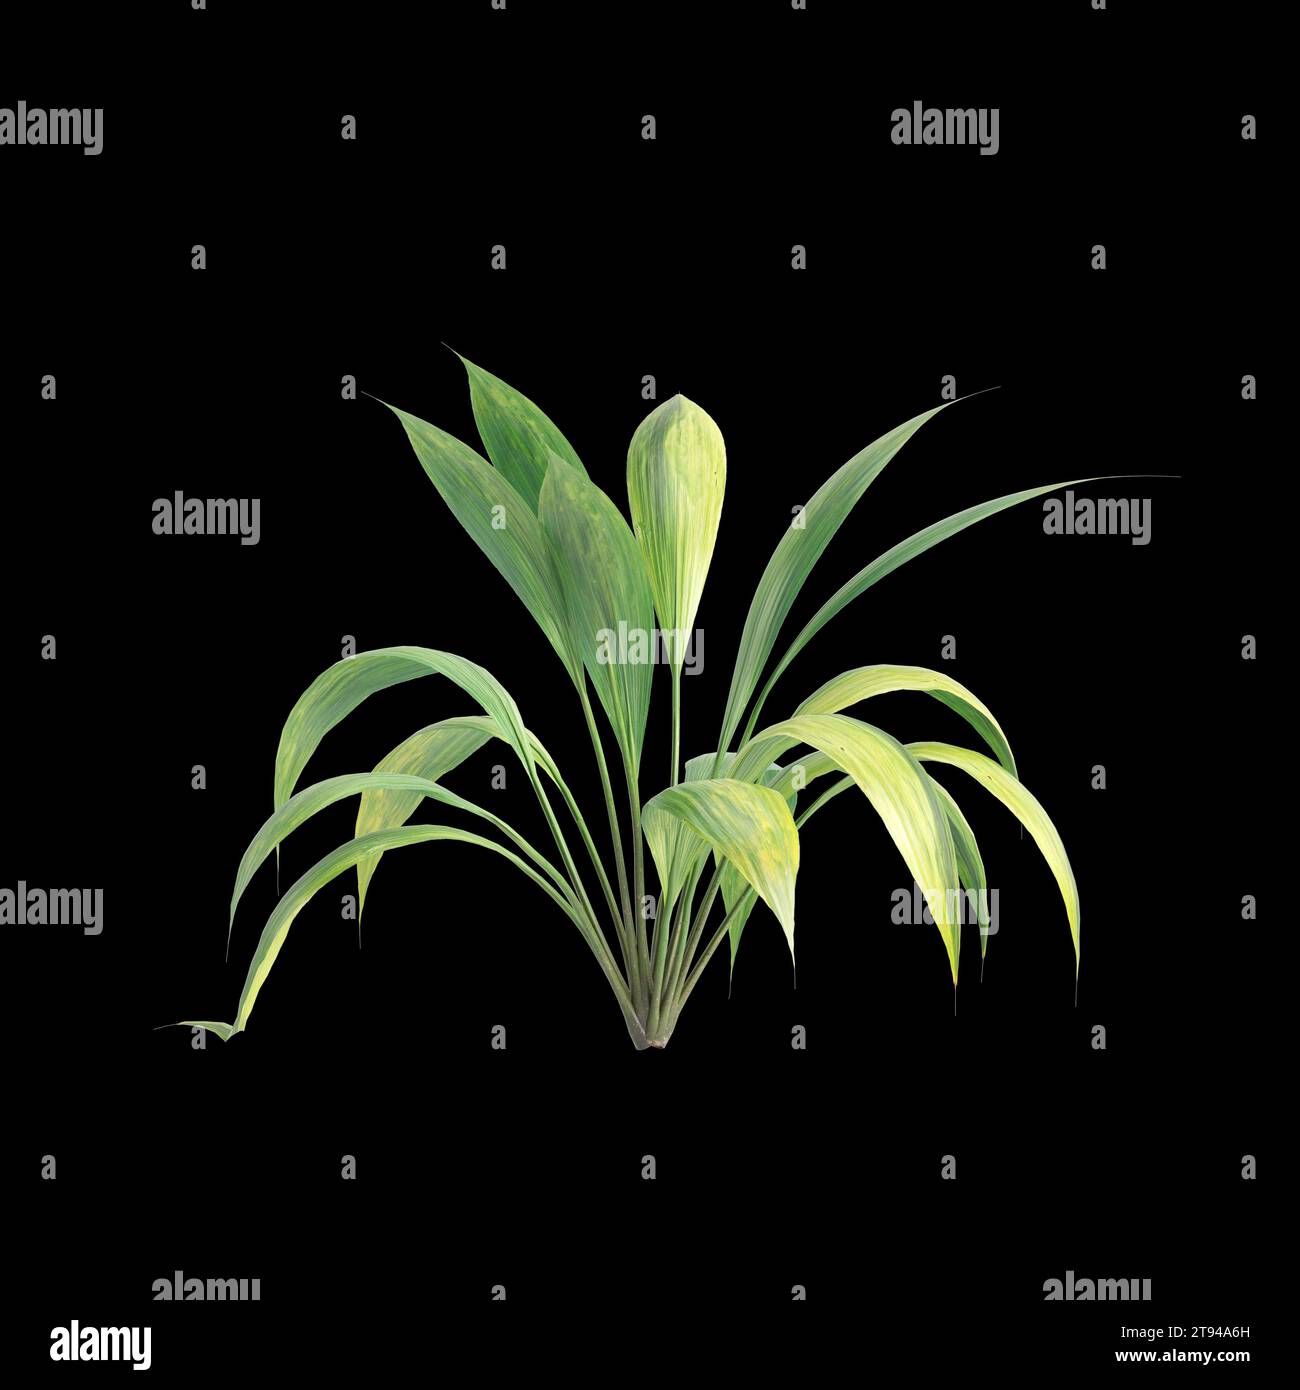 3d illustration of Capitulata Palm Grass isolated on black baclground Stock Photo